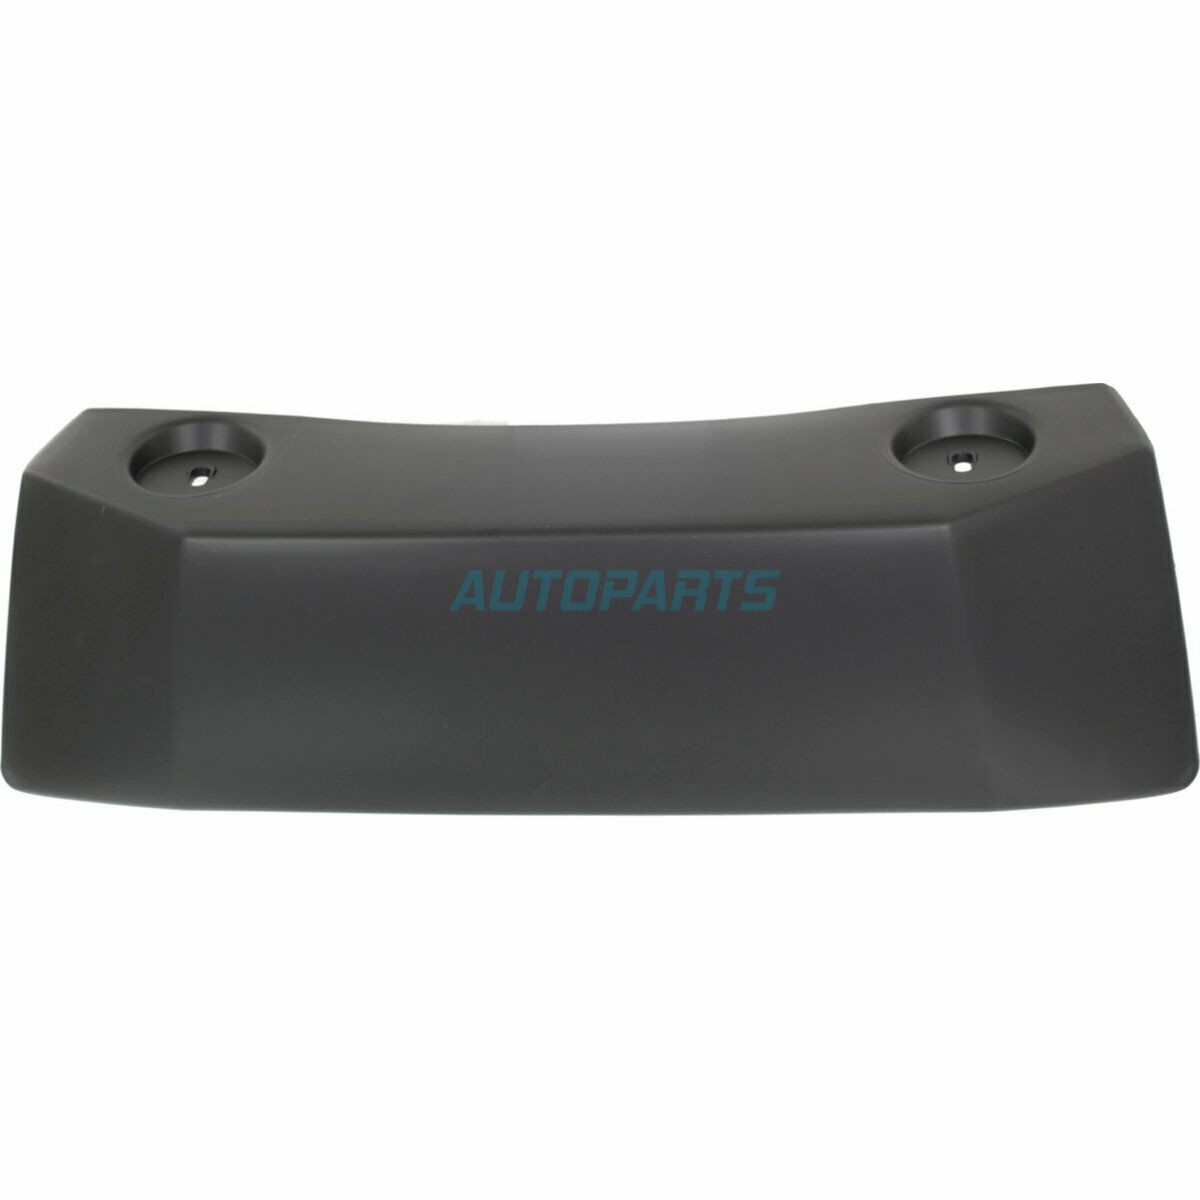 New Bumper Tow Hitch Hole Cover Rear for Cadillac Escalade 2007-2014 GM1129106